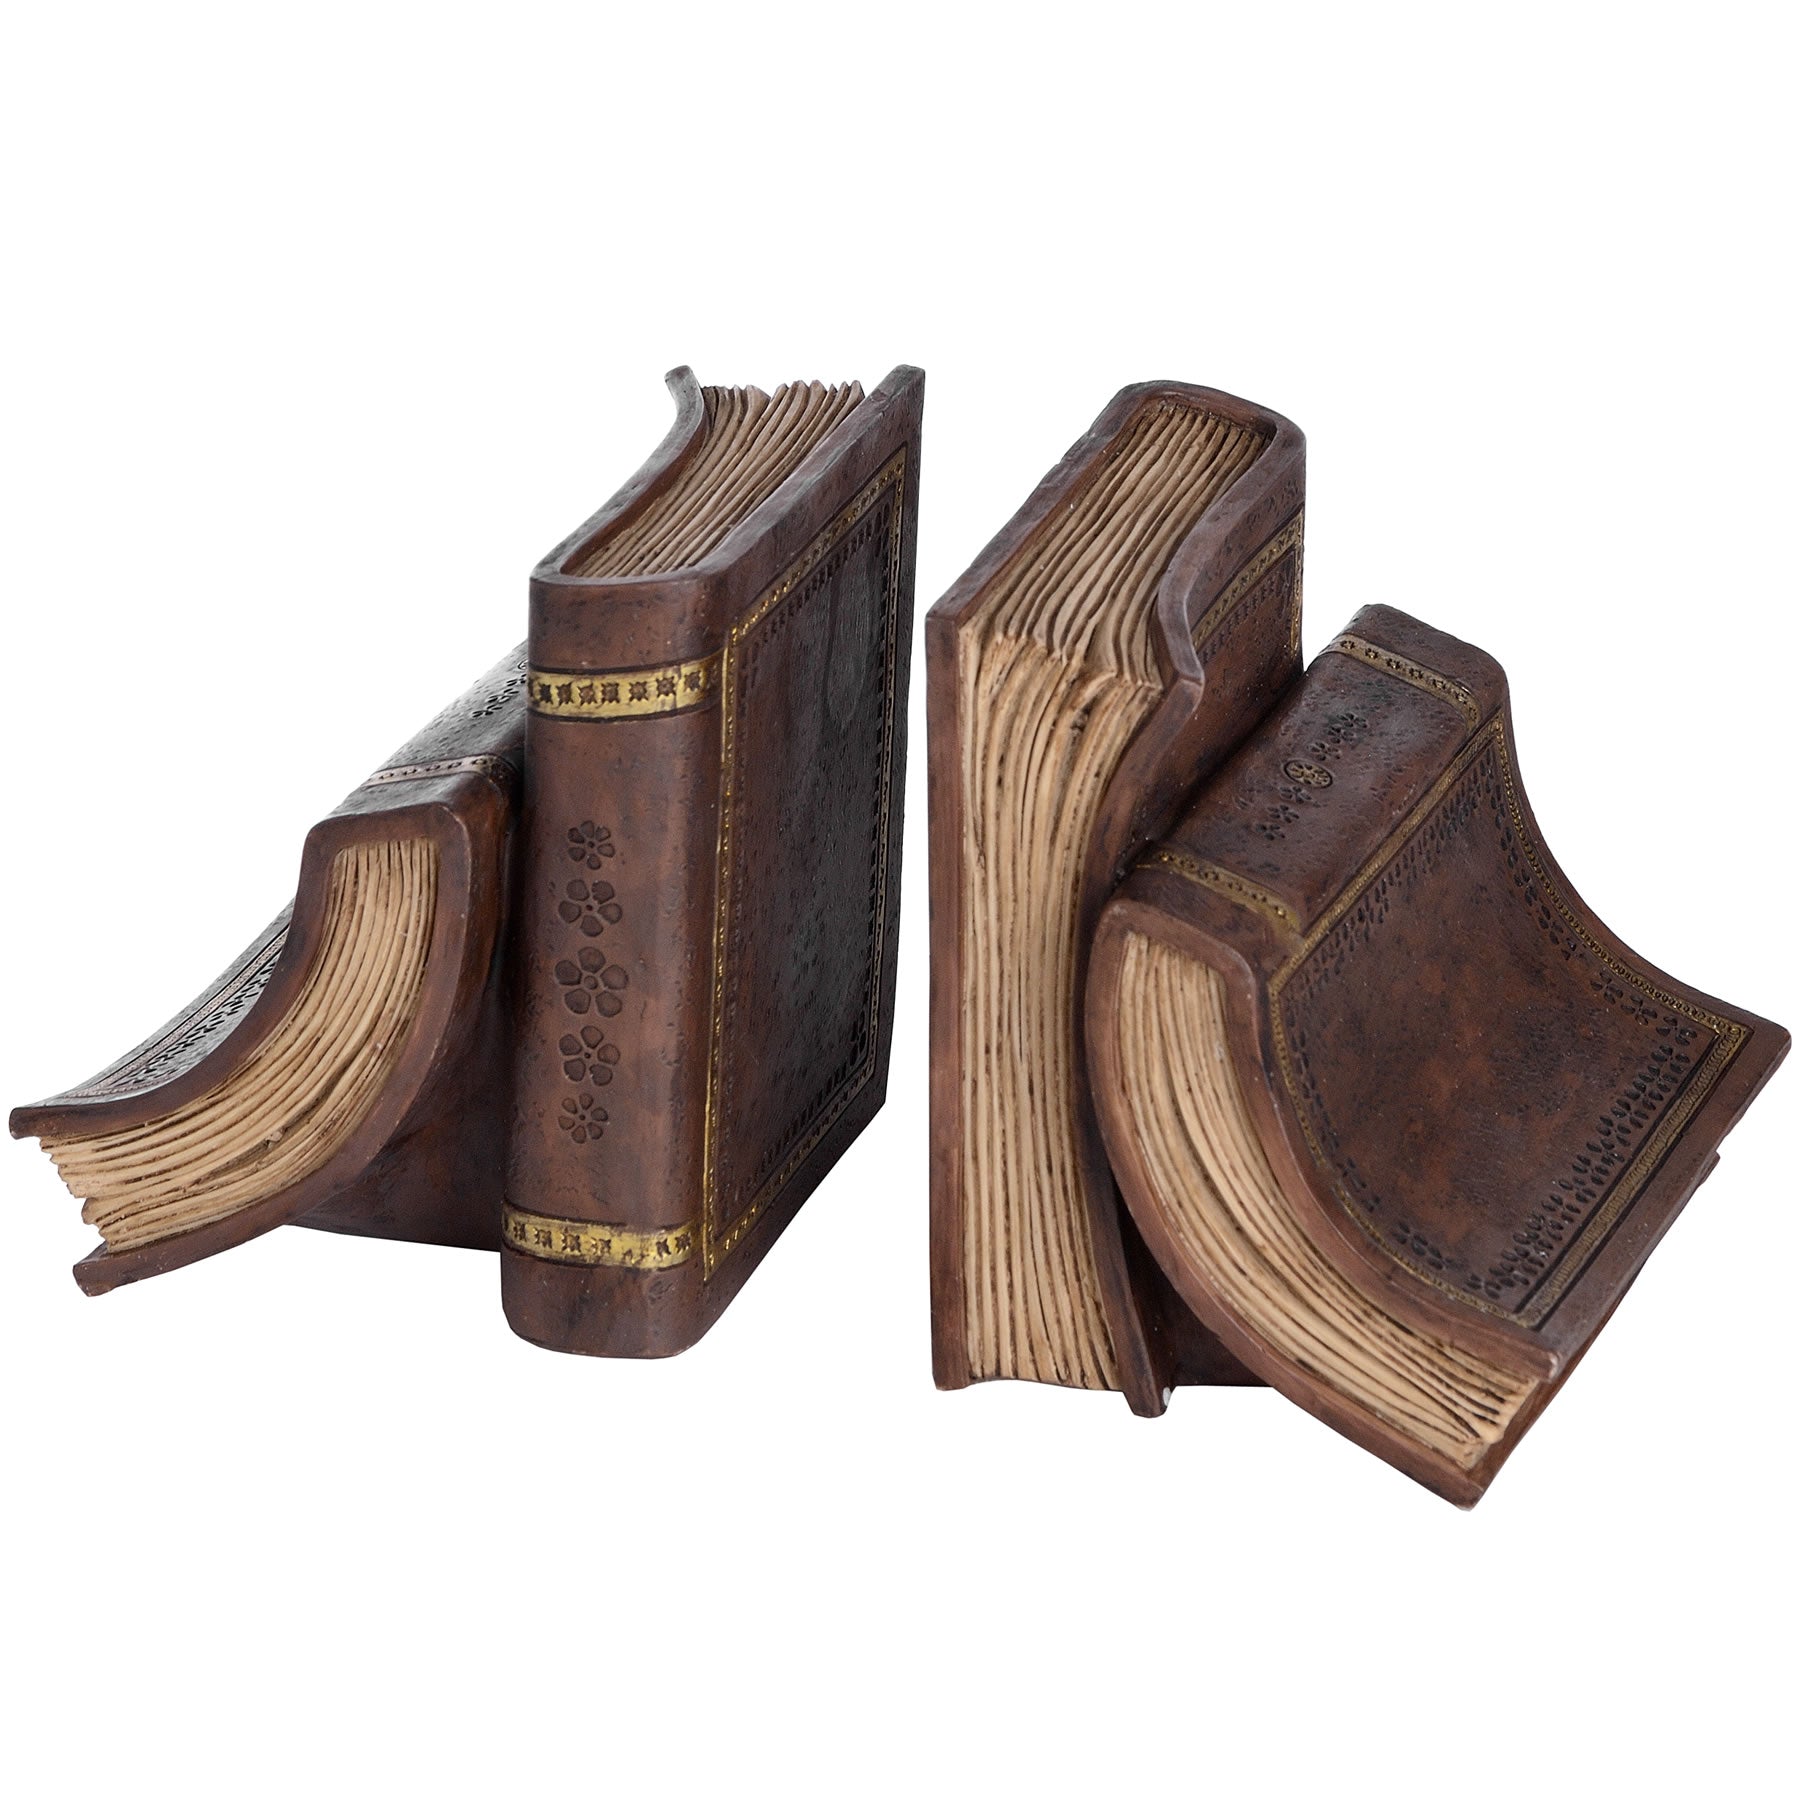 View Pair of Old Books Bookends information